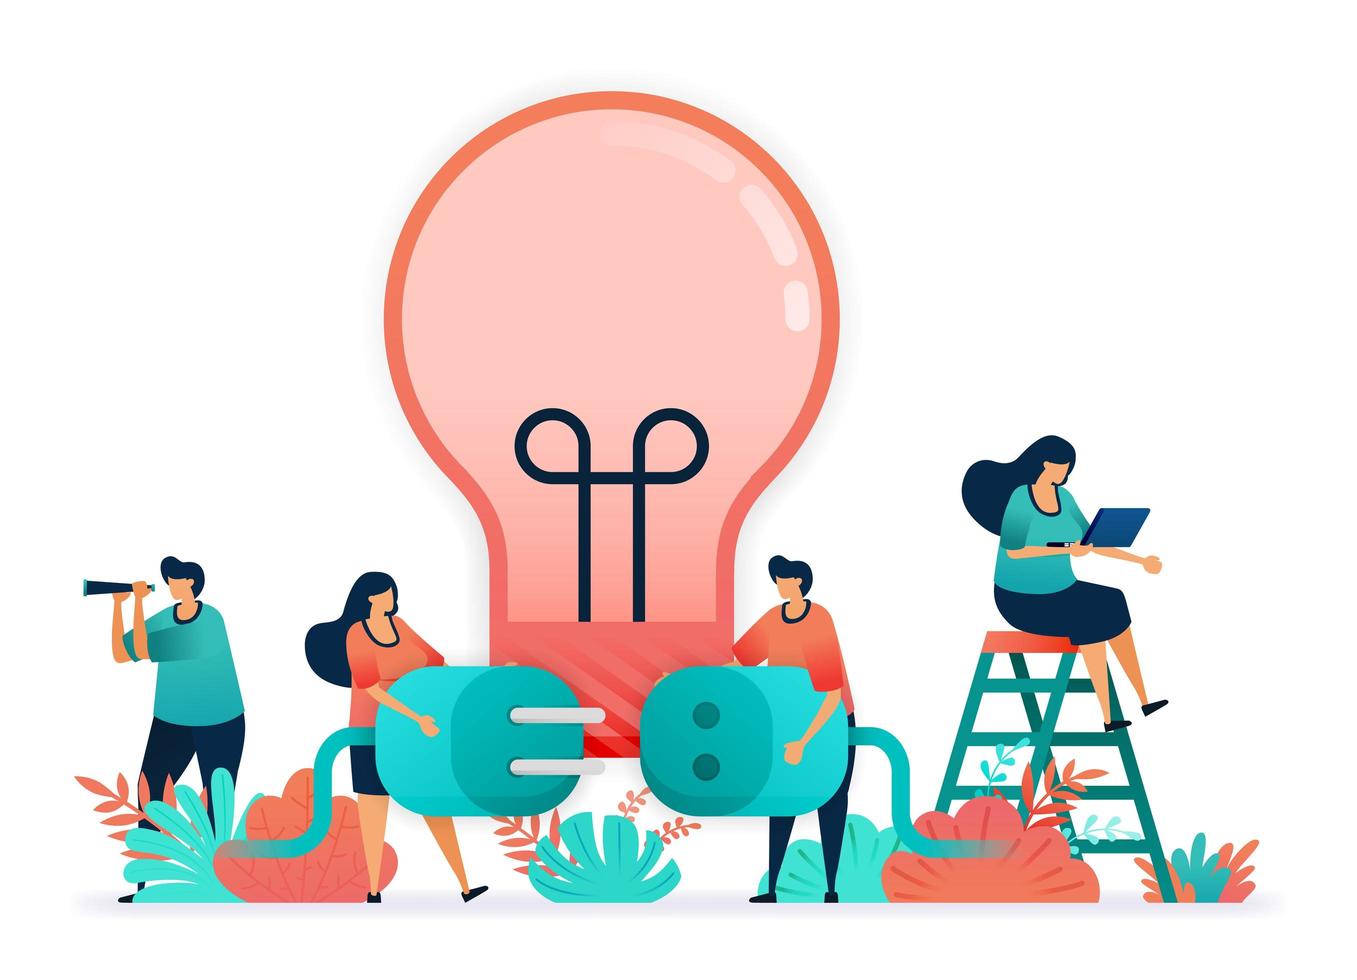 Light bulbs to light with electricity. connect plug and sockets. metaphor of ideas, inspiration, teamwork. Creativity at business, independently in solving problem, brainstorming for solution vector